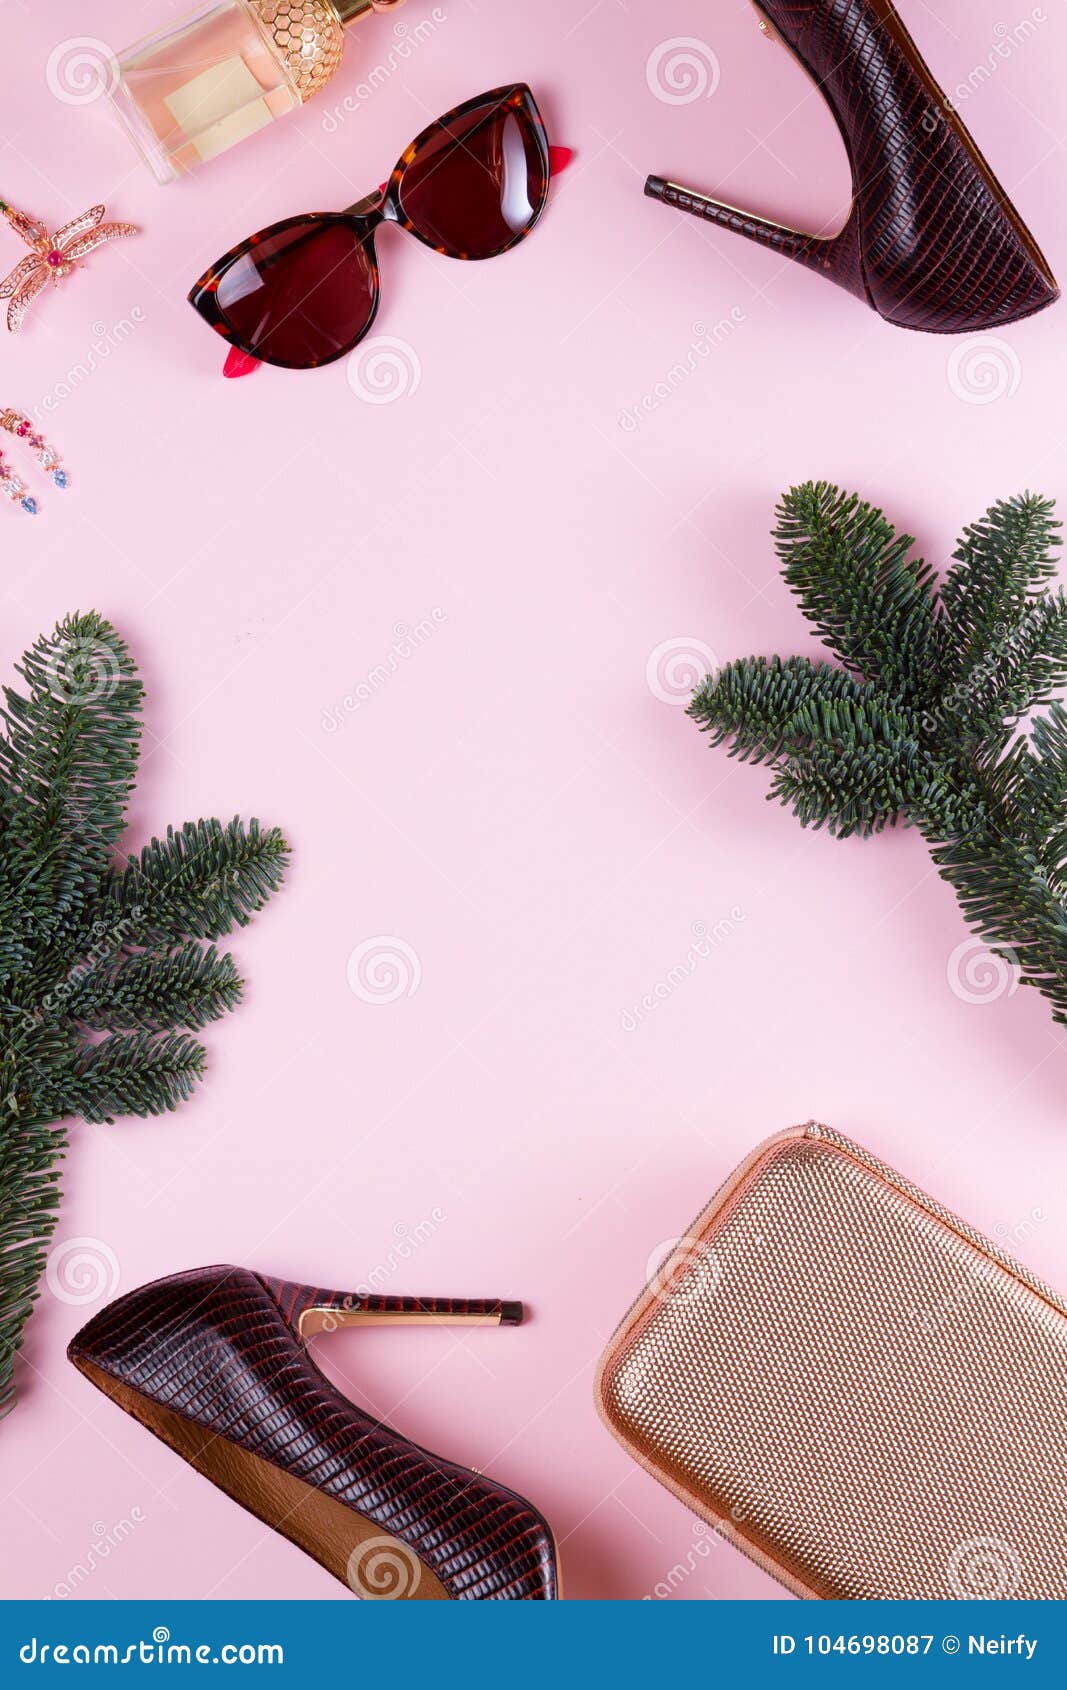 Hight Heel Shoes for Christmas Party Stock Image - Image of christmas ...